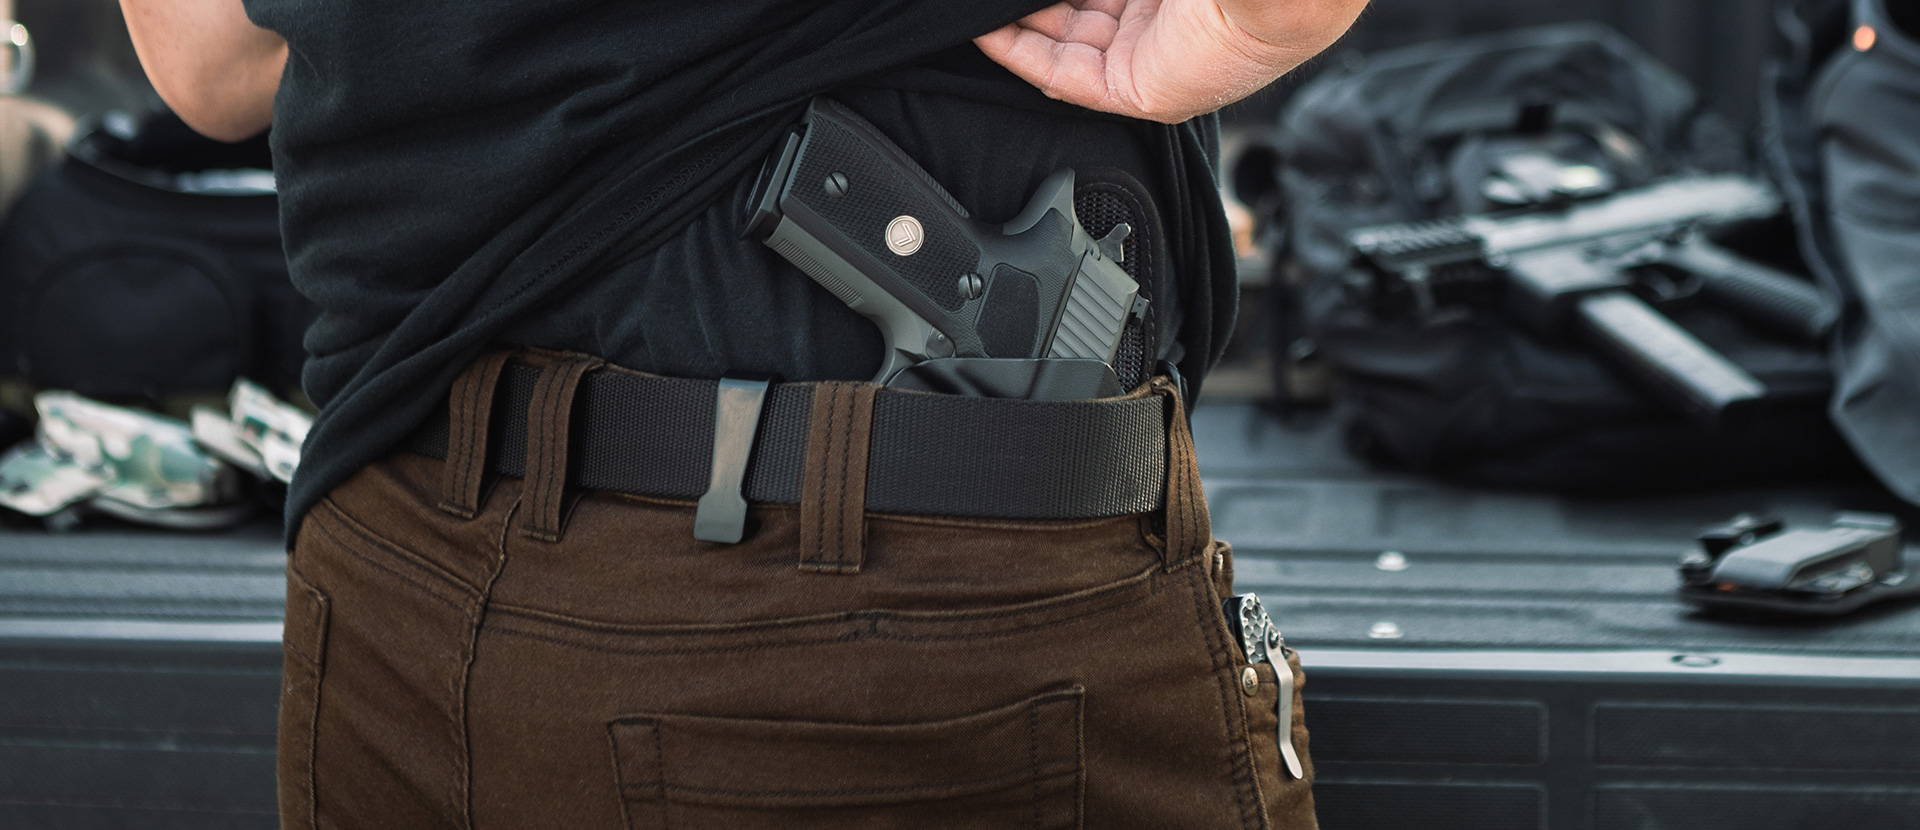 StealthGearUSA Ventcore Belly and Thigh Holster - StealthGearUSA